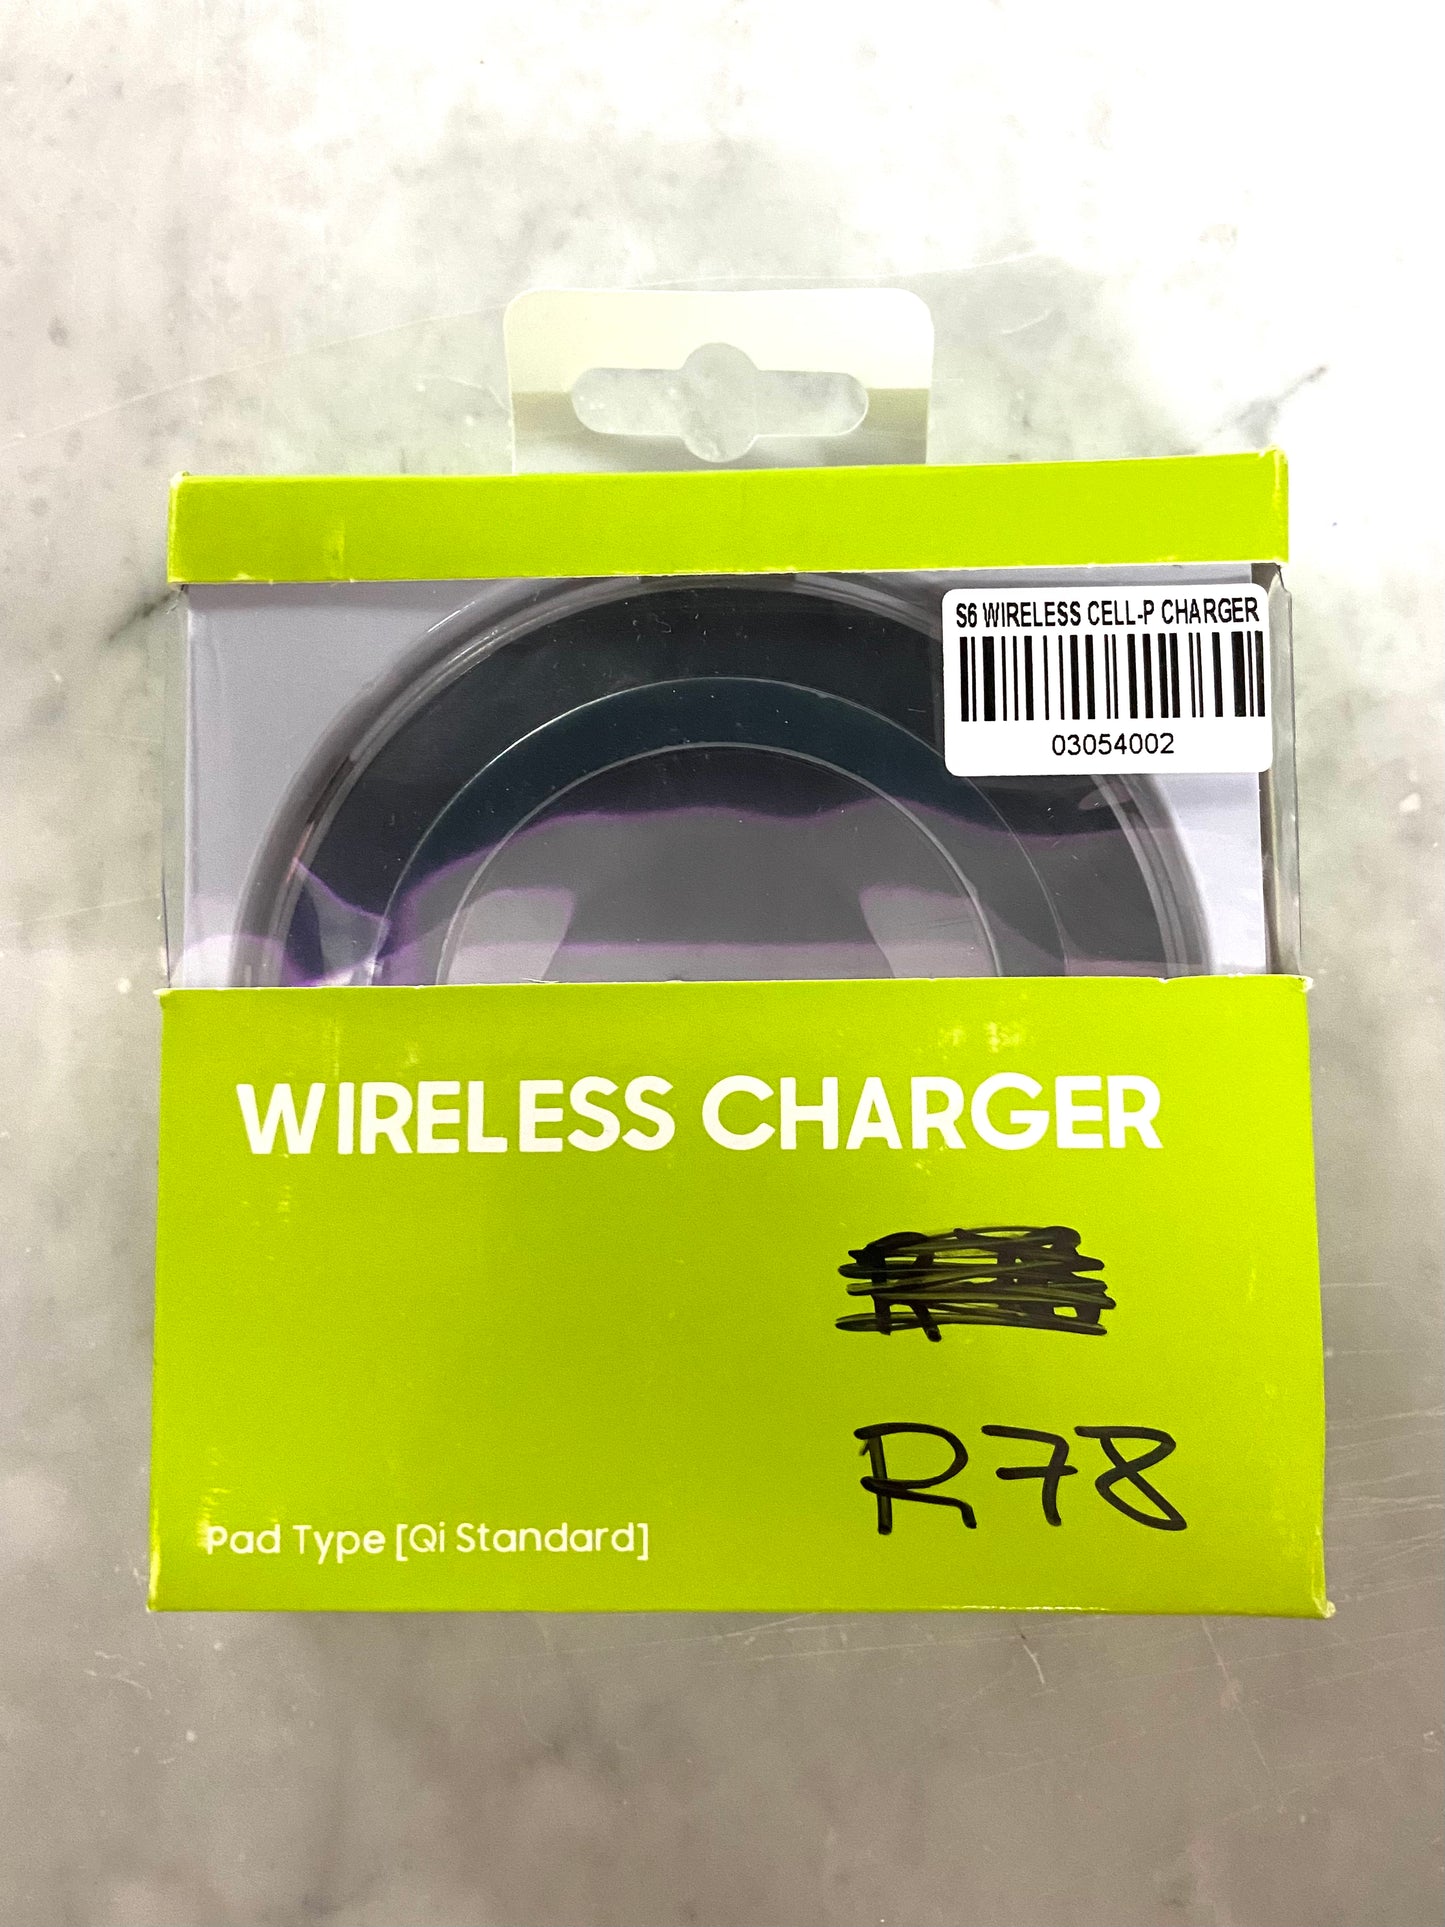 S6 Wireless Charger